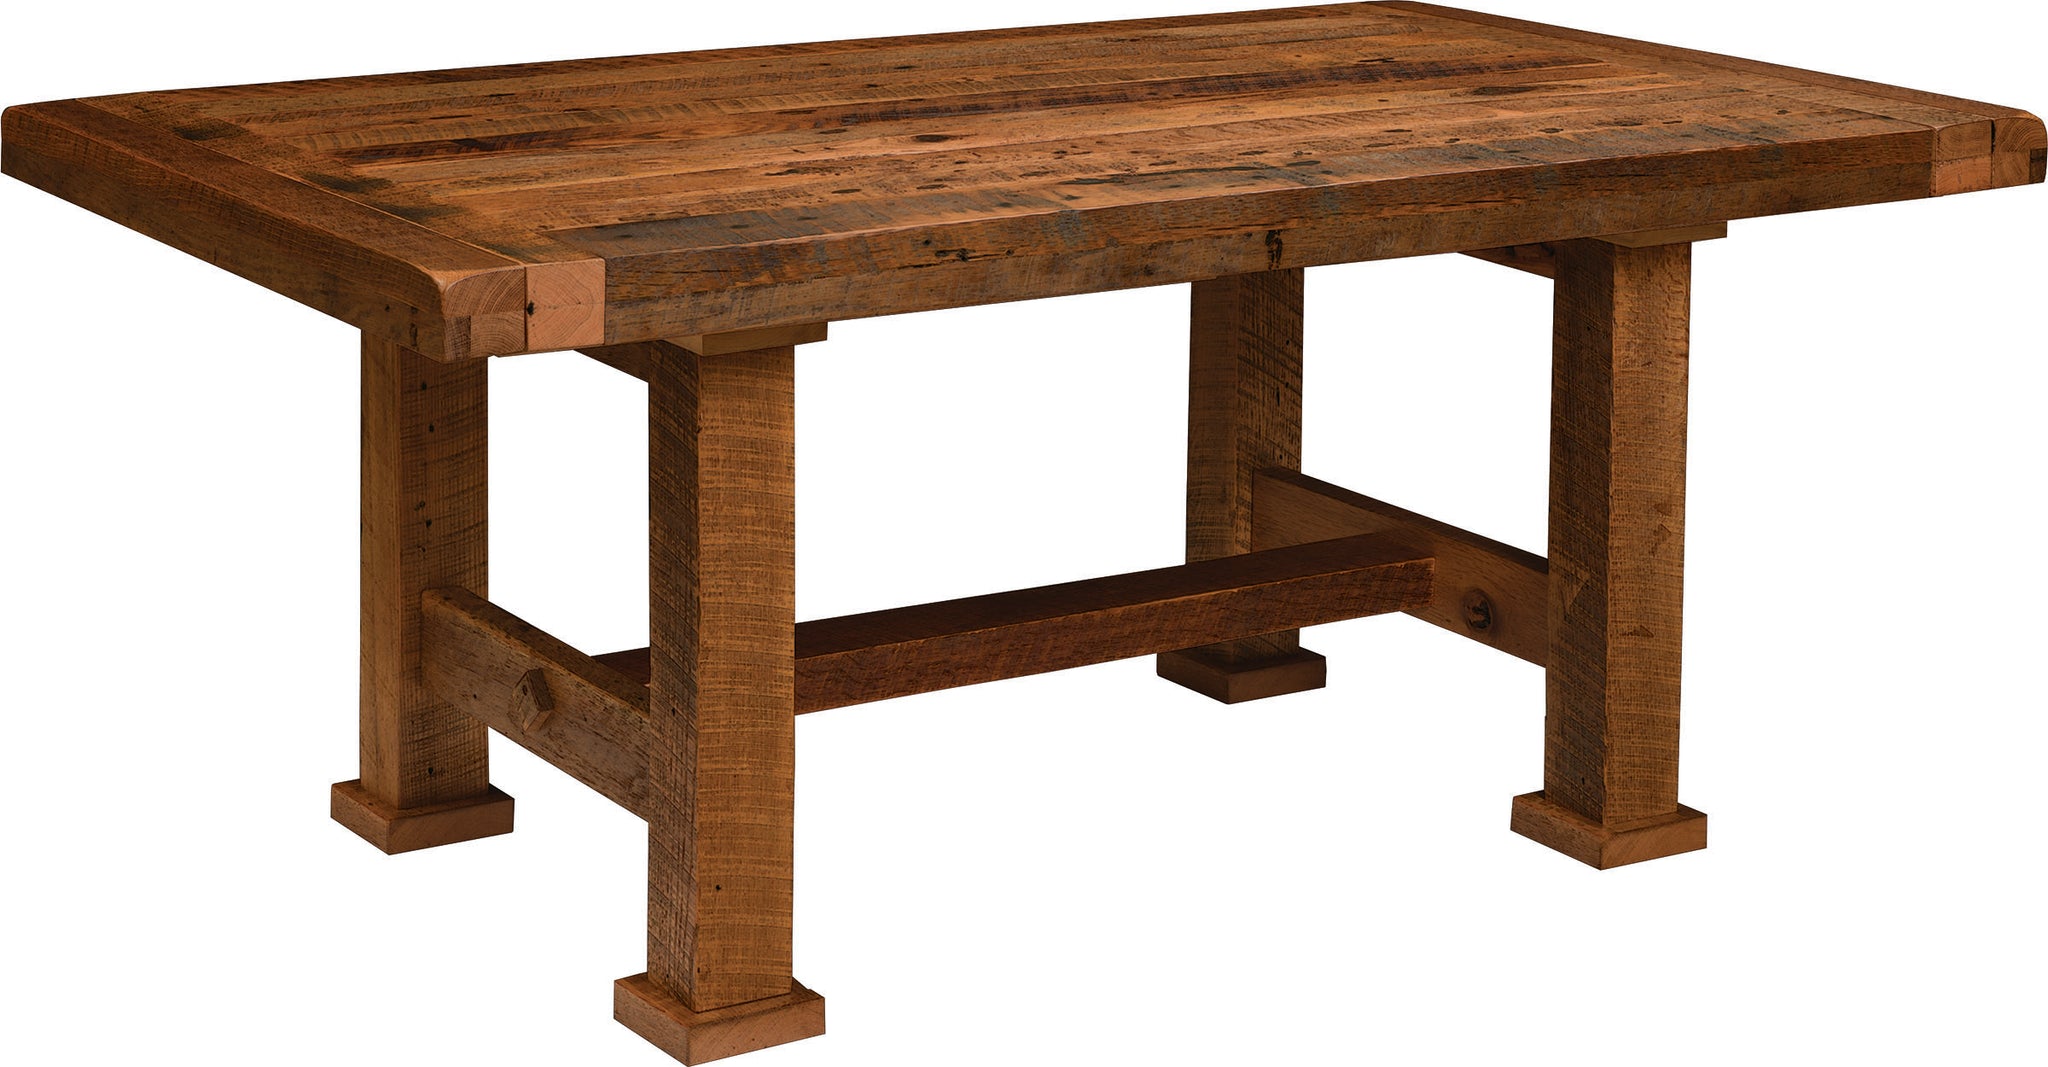 Rustic Oak Table with Bench